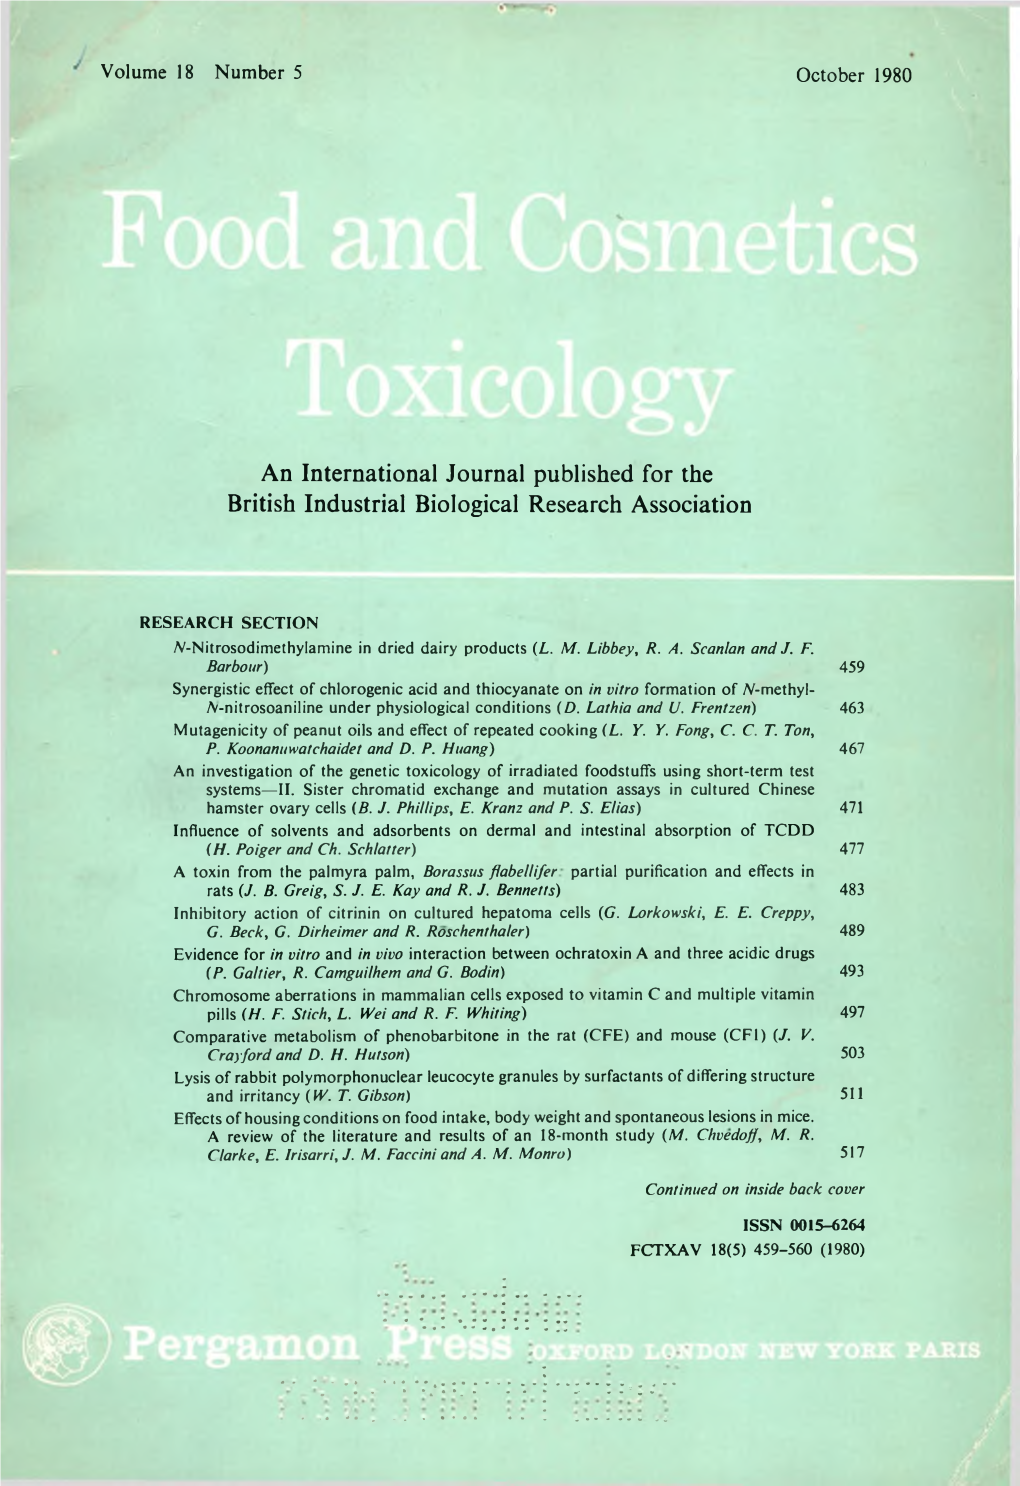 Food and Cosmetics Toxicology 1980 Volume 18 No.5